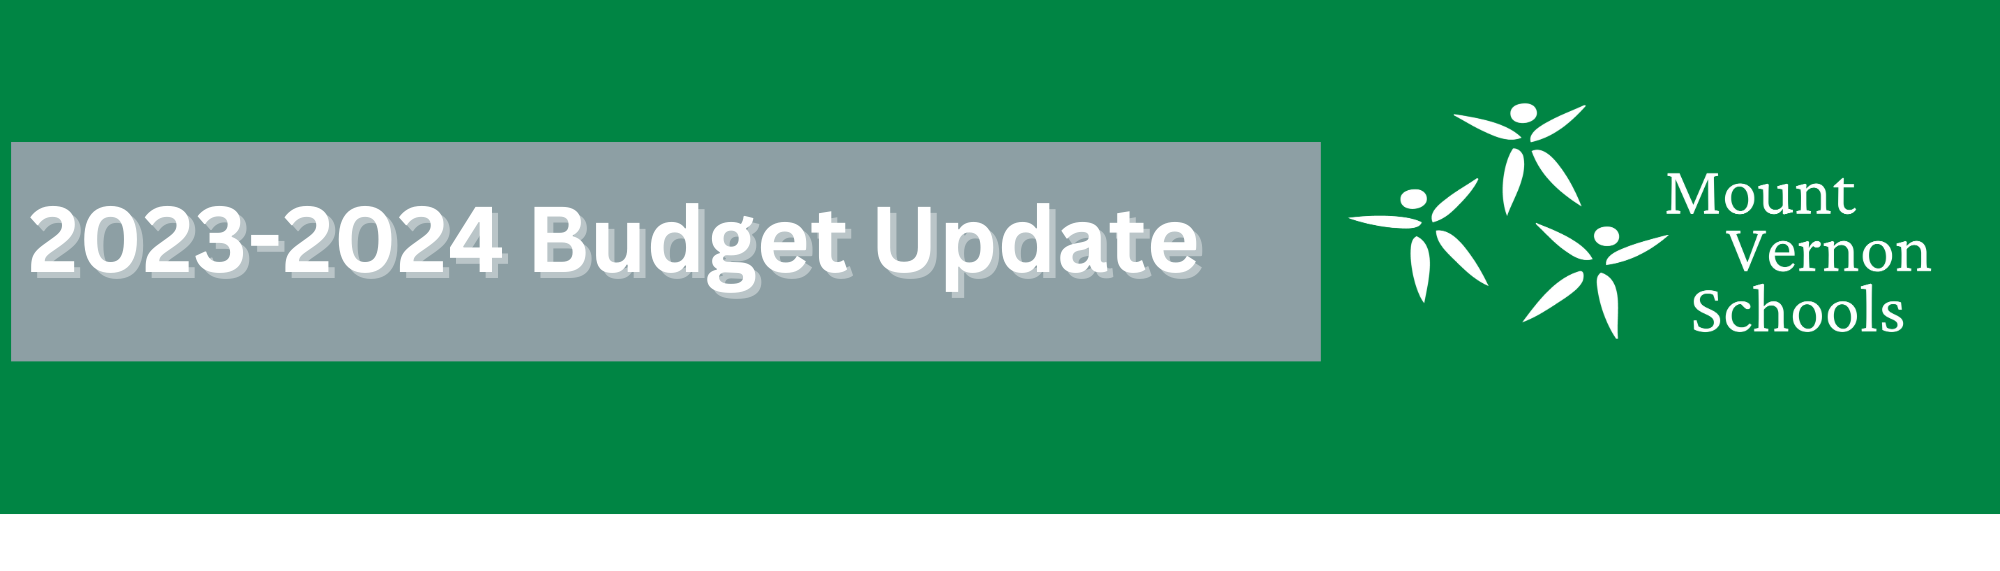 Green background with Budget Update 2023